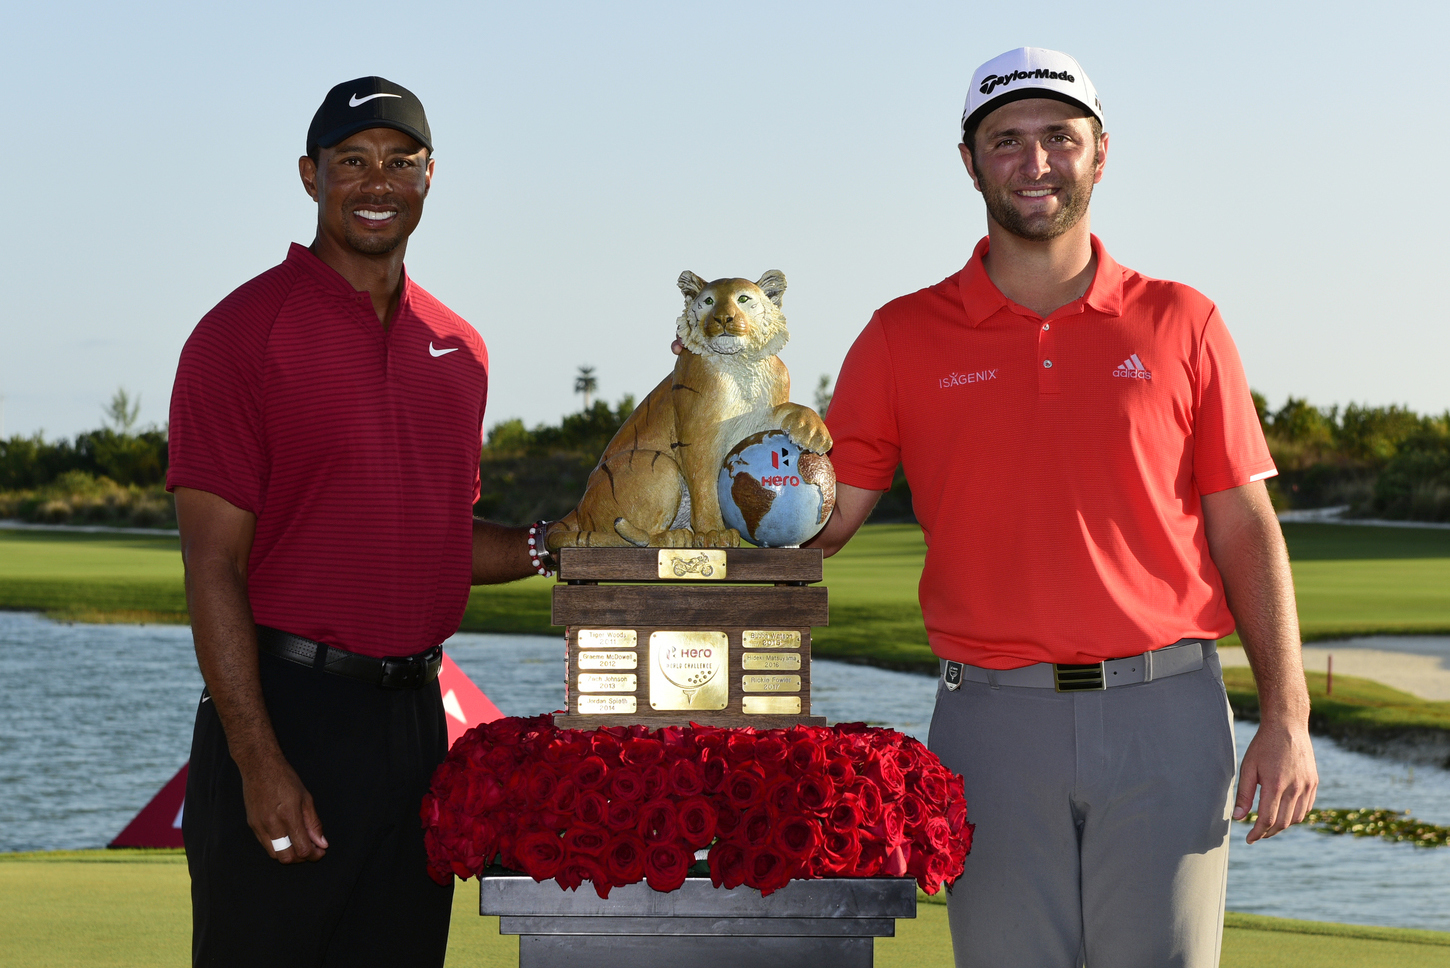 Spain's Jon Rahm, right, poses with host Tiger Woods after winning the Hero World Challenge.